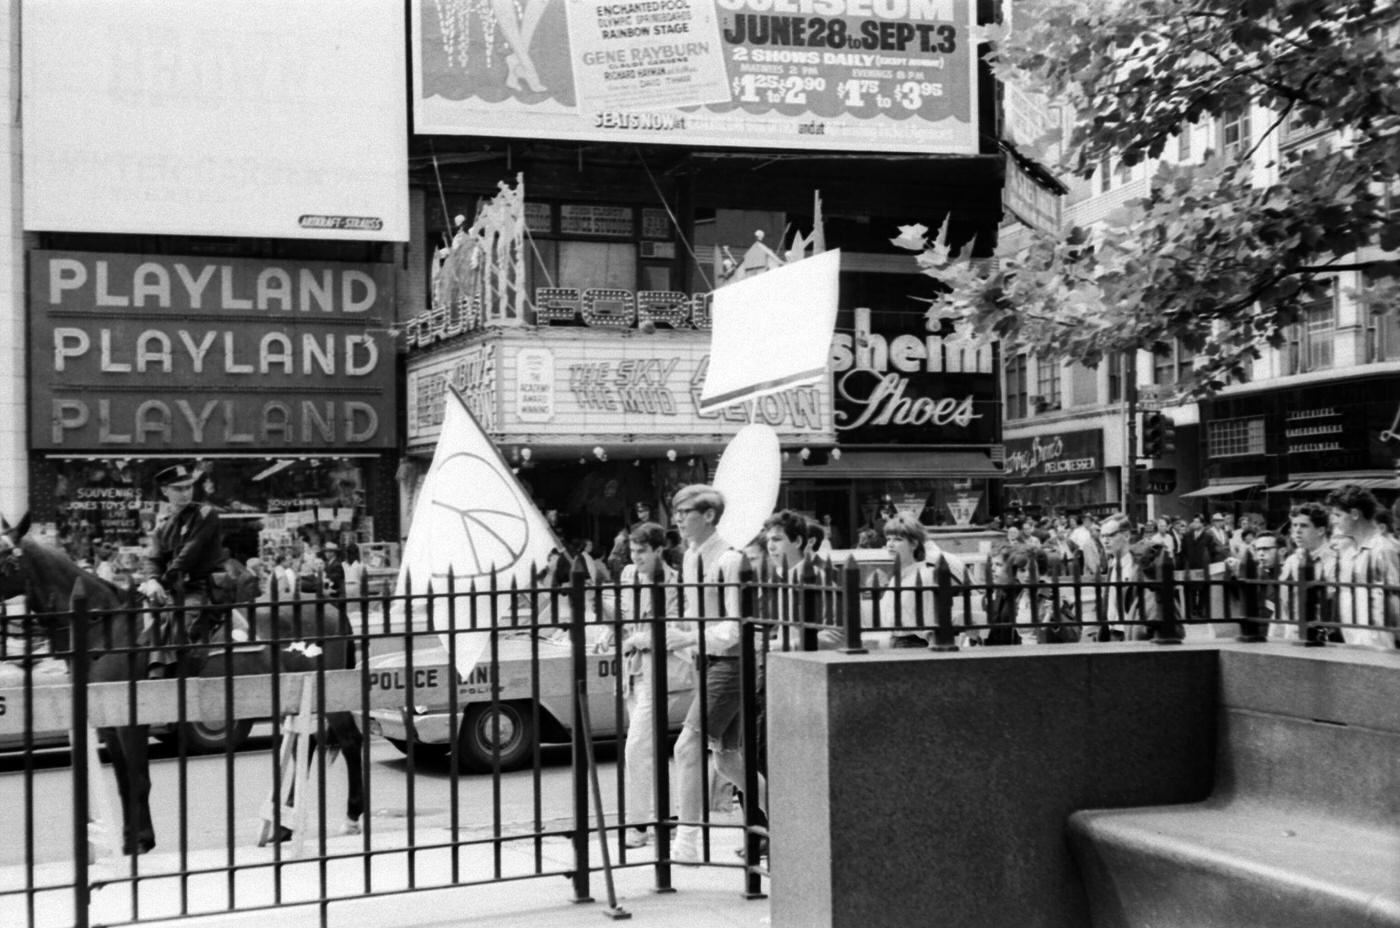 A View Of People Protesting Against War And Atom Bomb Testing By The Playland Arcade In Times Square, Manhattan, 1965.